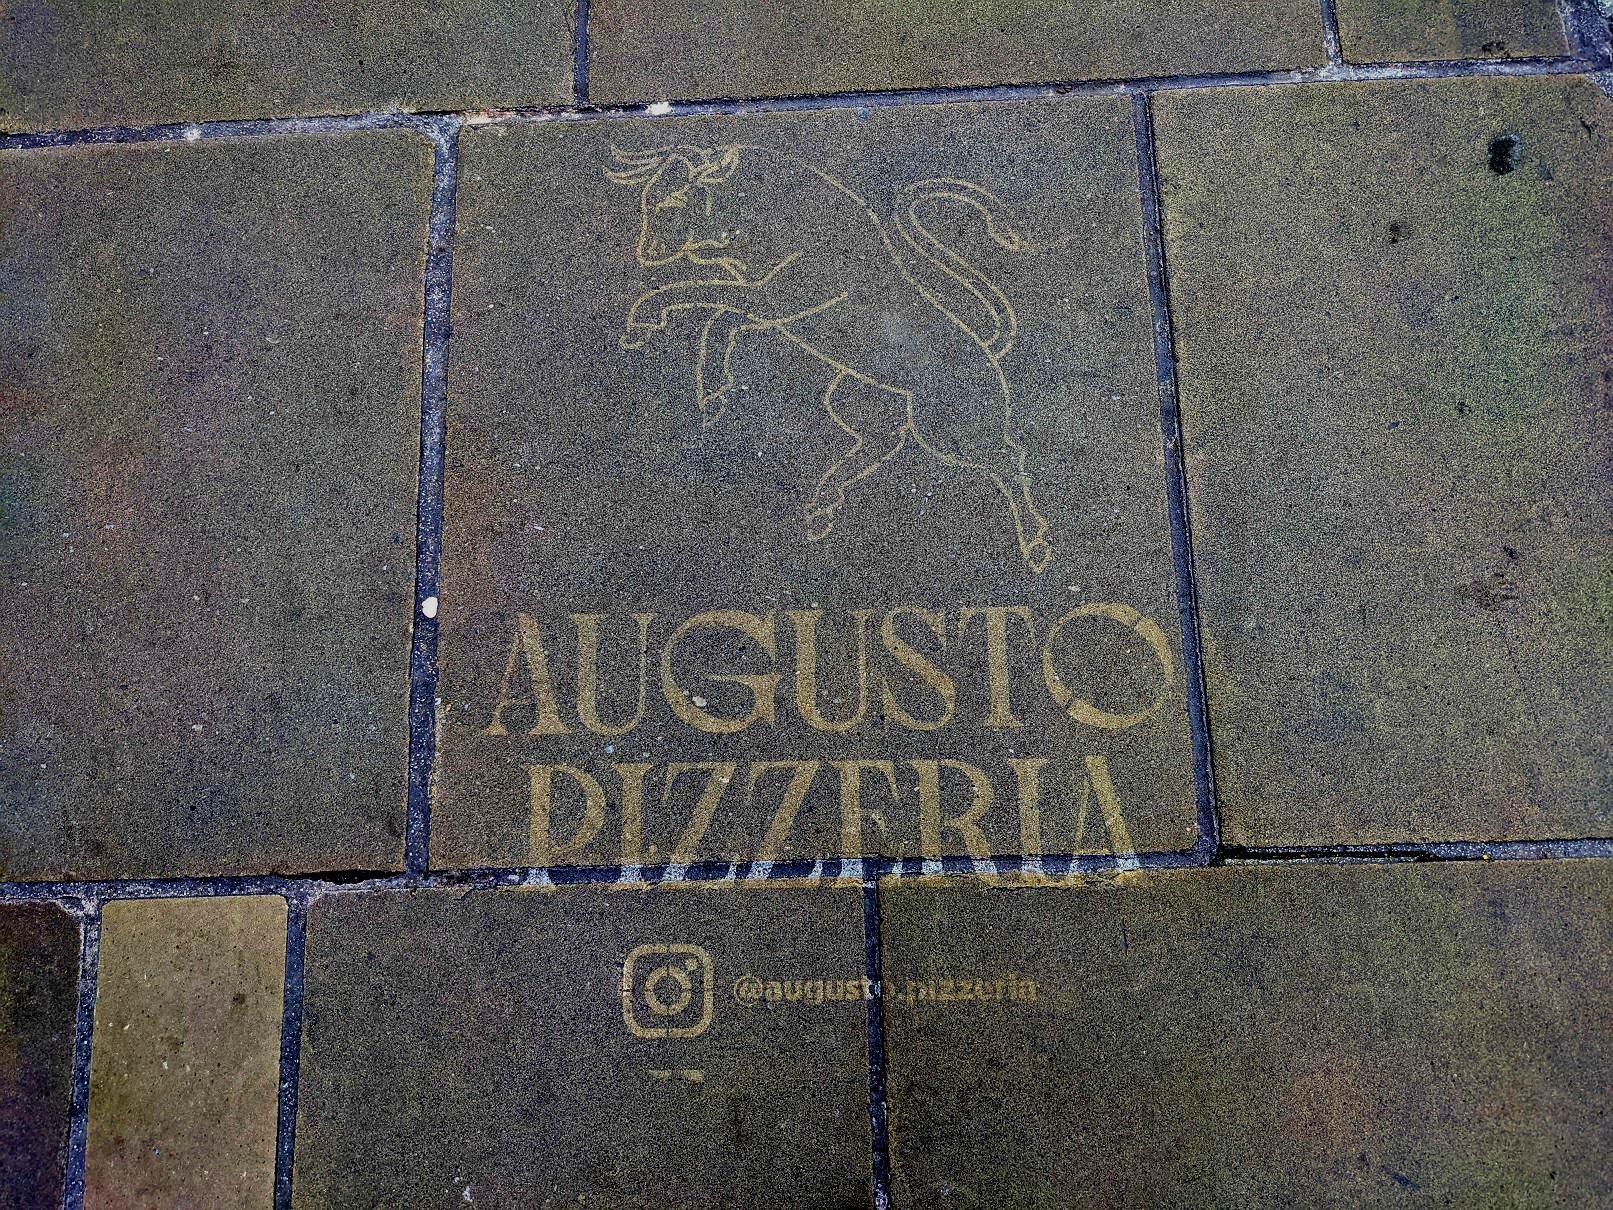 One of the clean street graffiti markings promoting the new Augusto Pizzeria restaurant in Northgate Street, Chester.